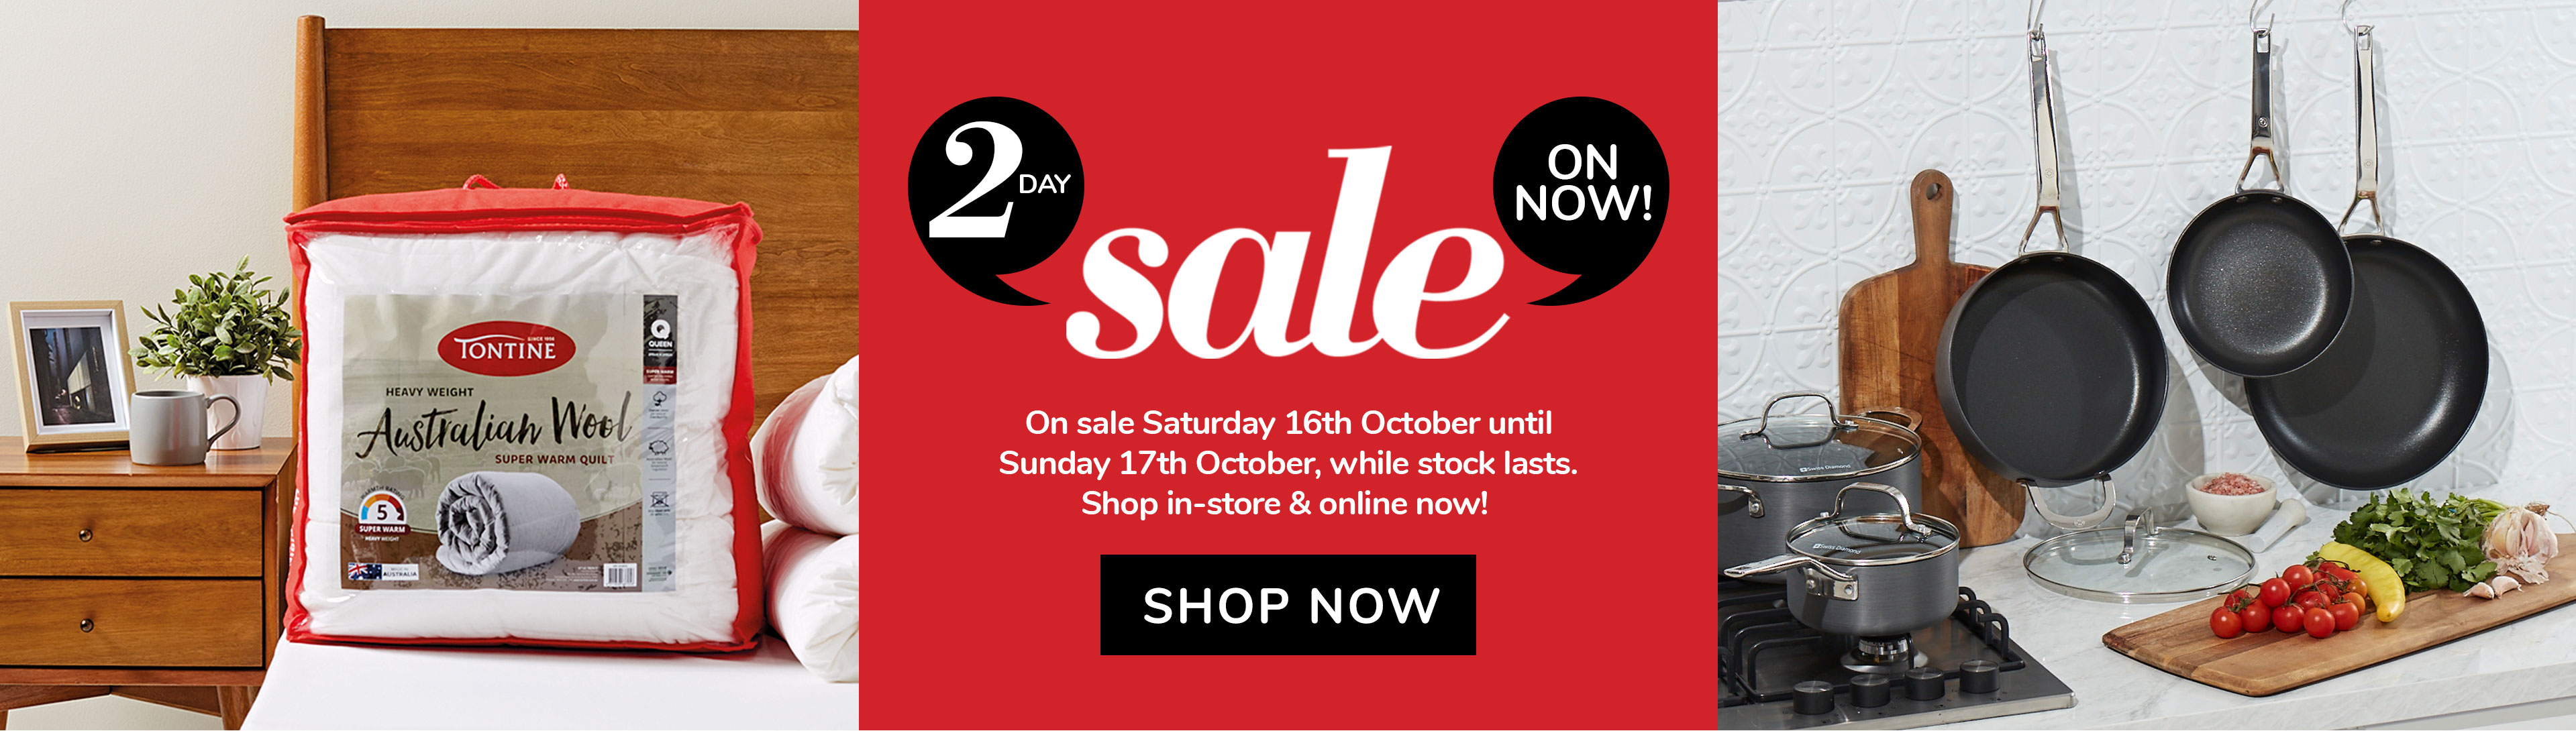 2 Day sale - up to 40% OFF on homeware, clothing & electrical